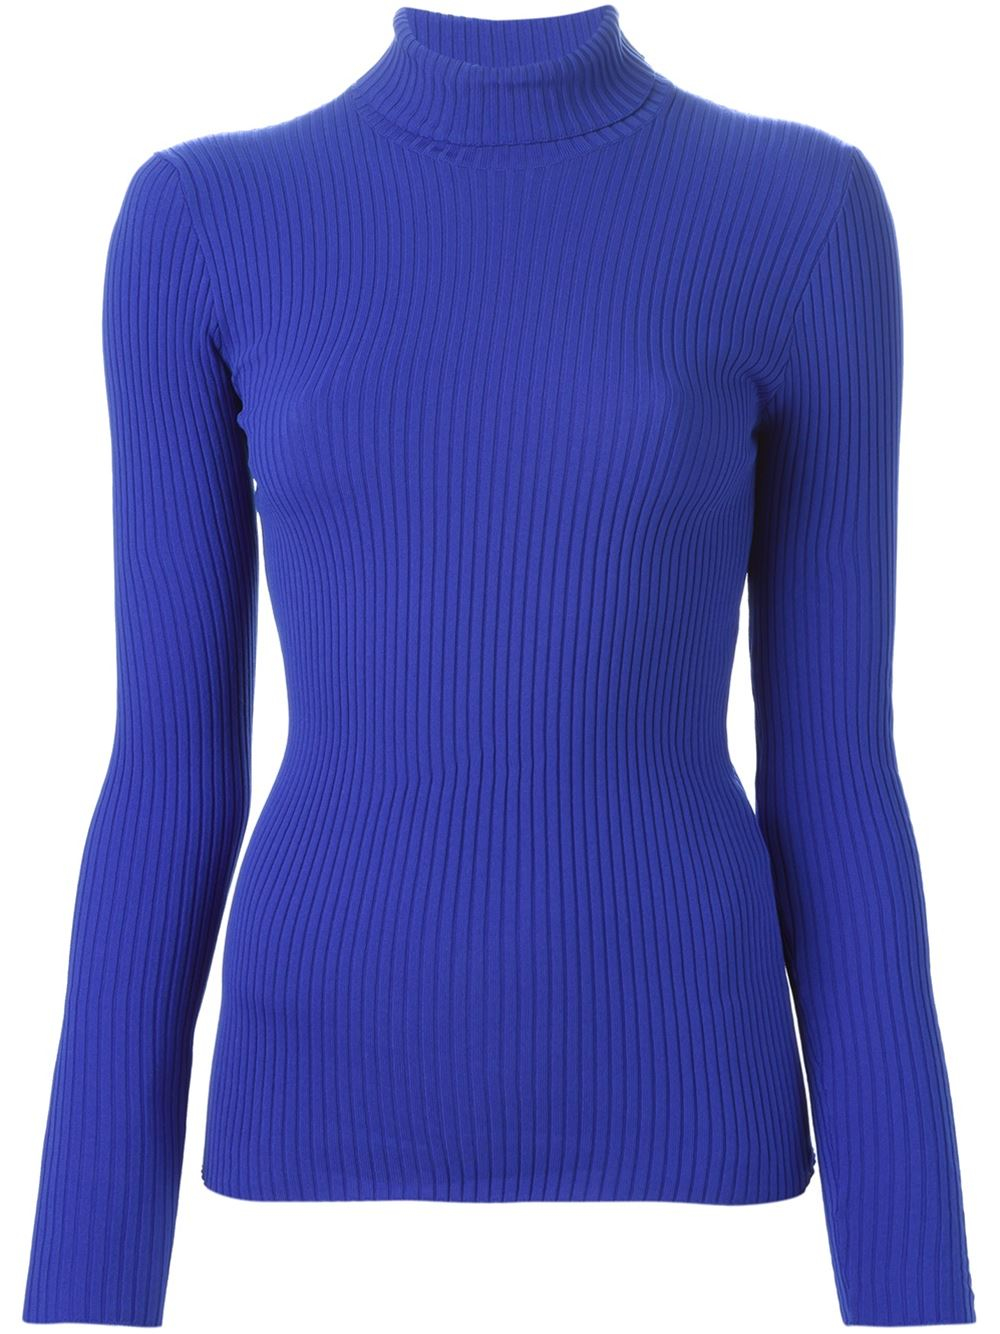 Msgm Funnel Neck Sweater in Blue | Lyst